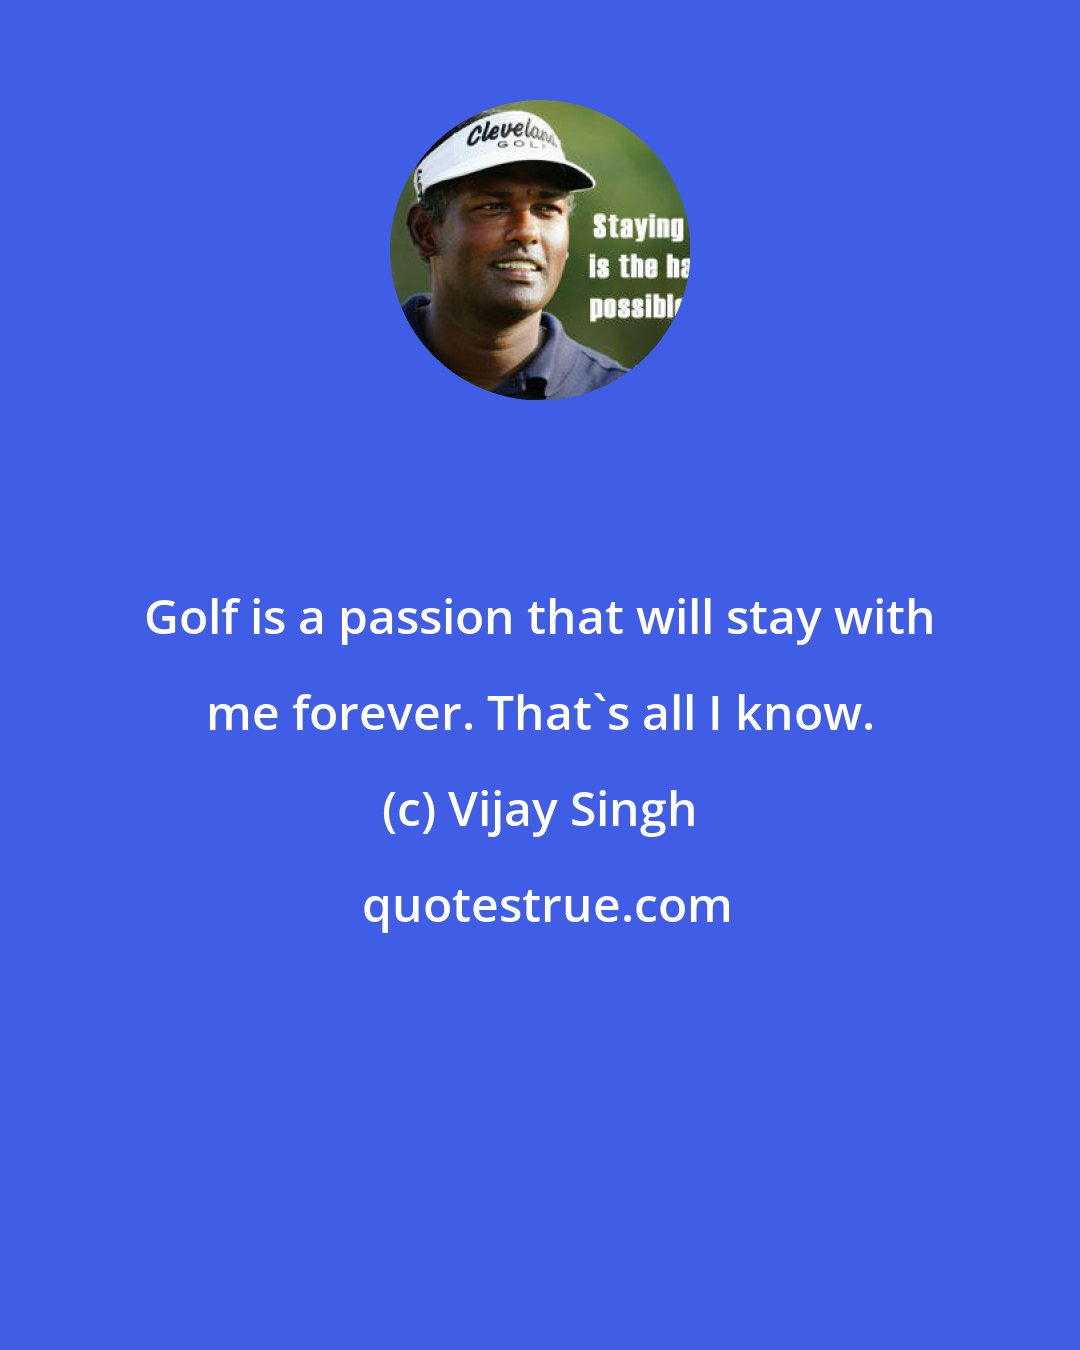 Vijay Singh: Golf is a passion that will stay with me forever. That's all I know.